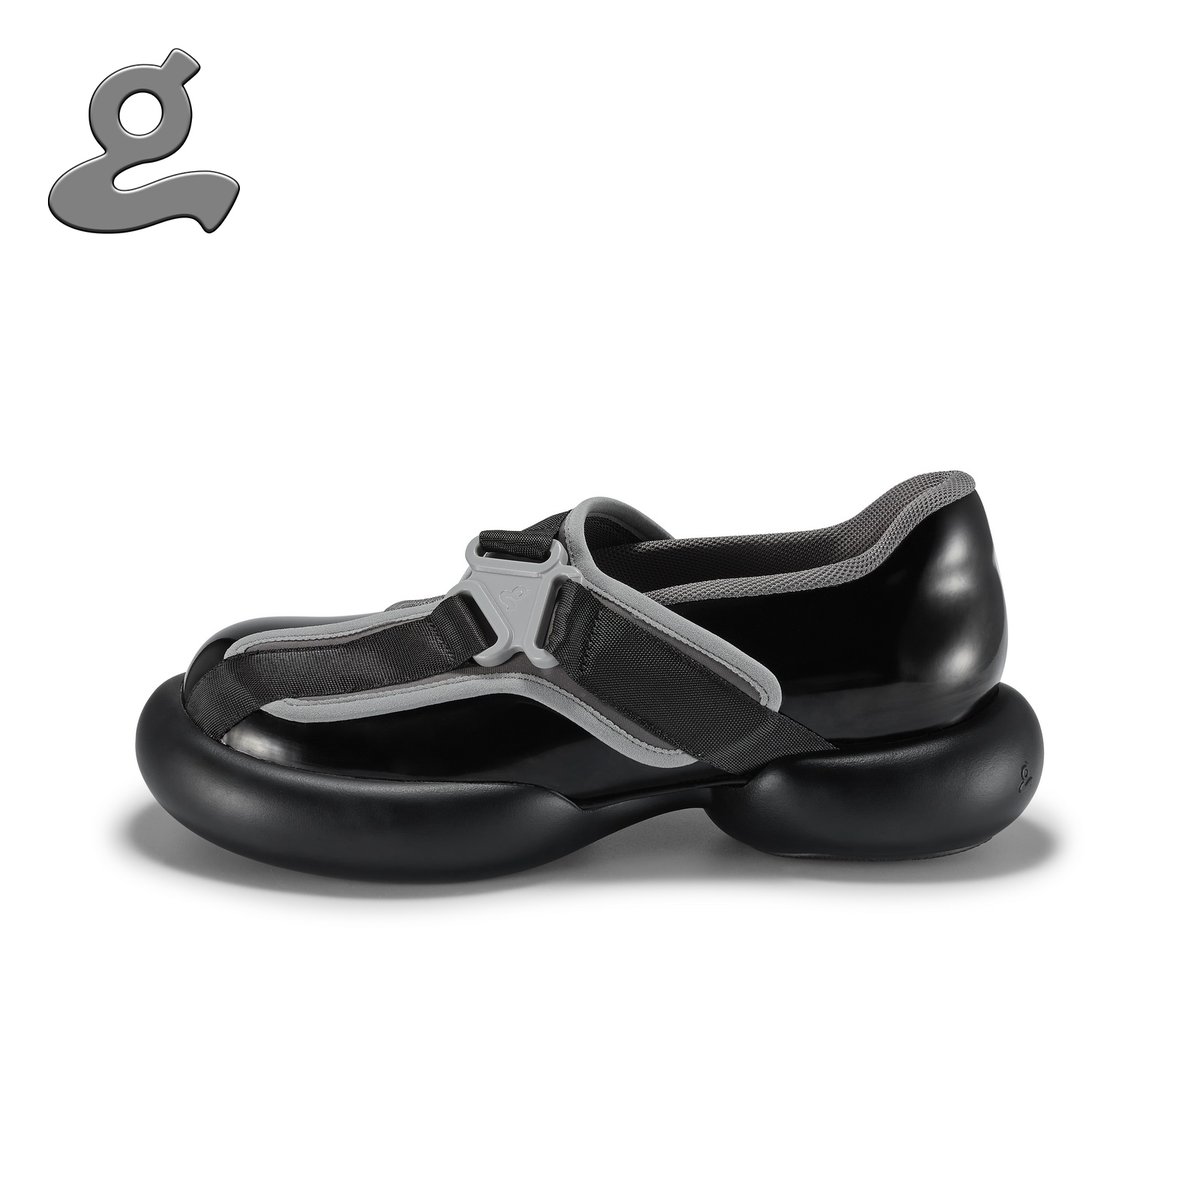 Image of Black Safety Buckle Mary Jane shoes